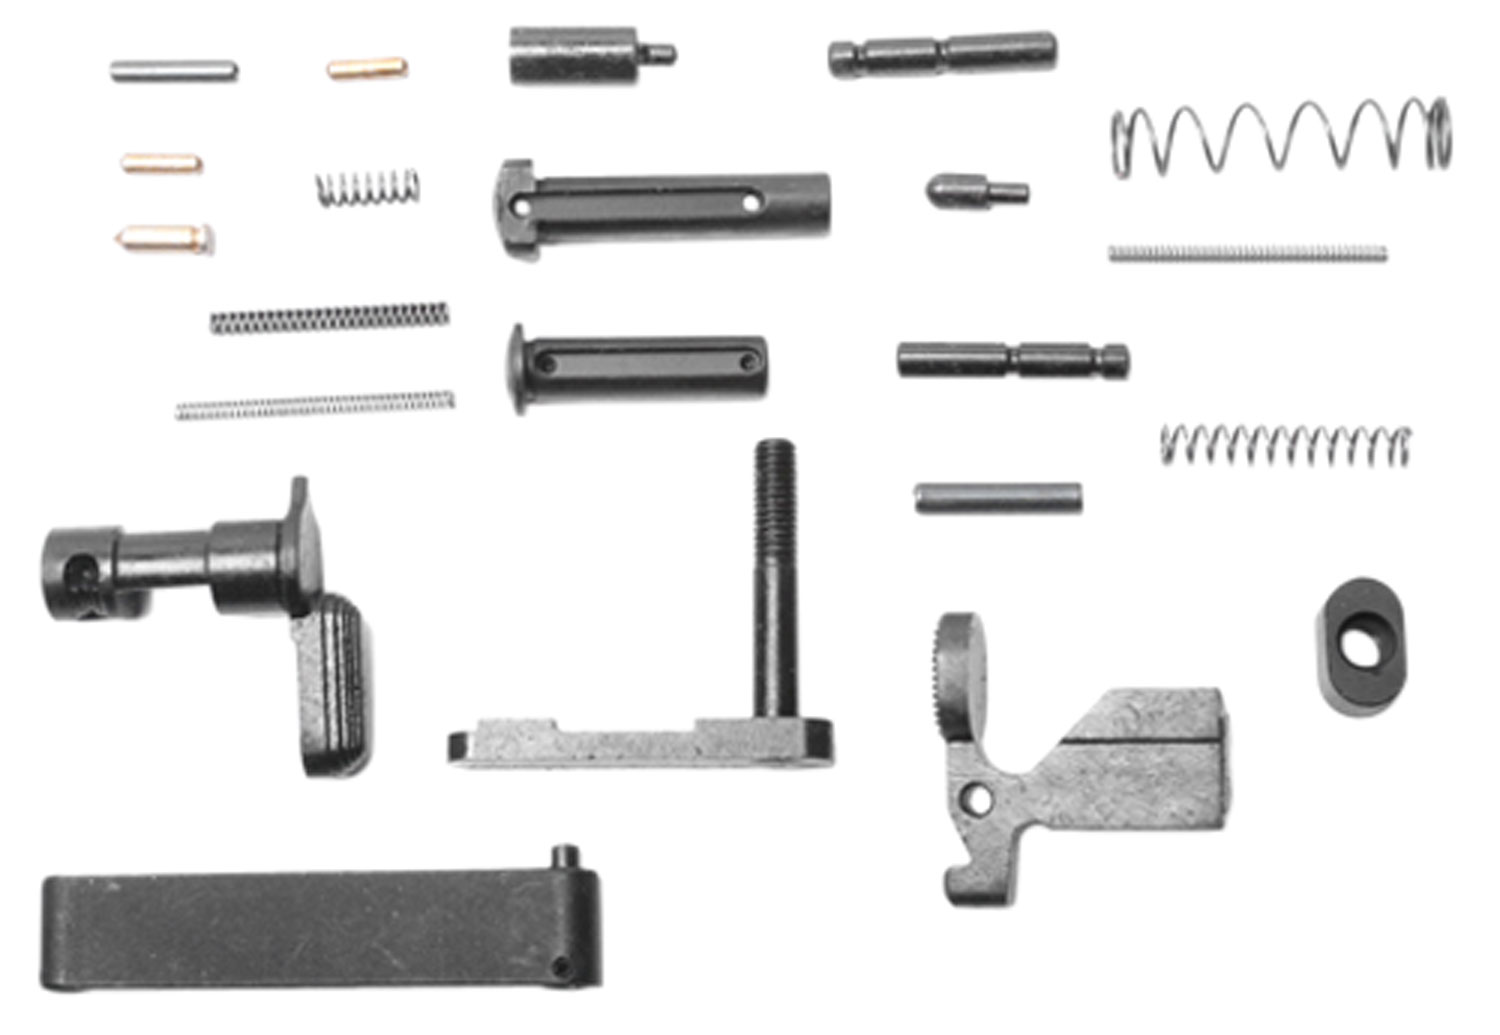 WILSON AR15 LOWER RECEIVER SMALL PARTS KIT